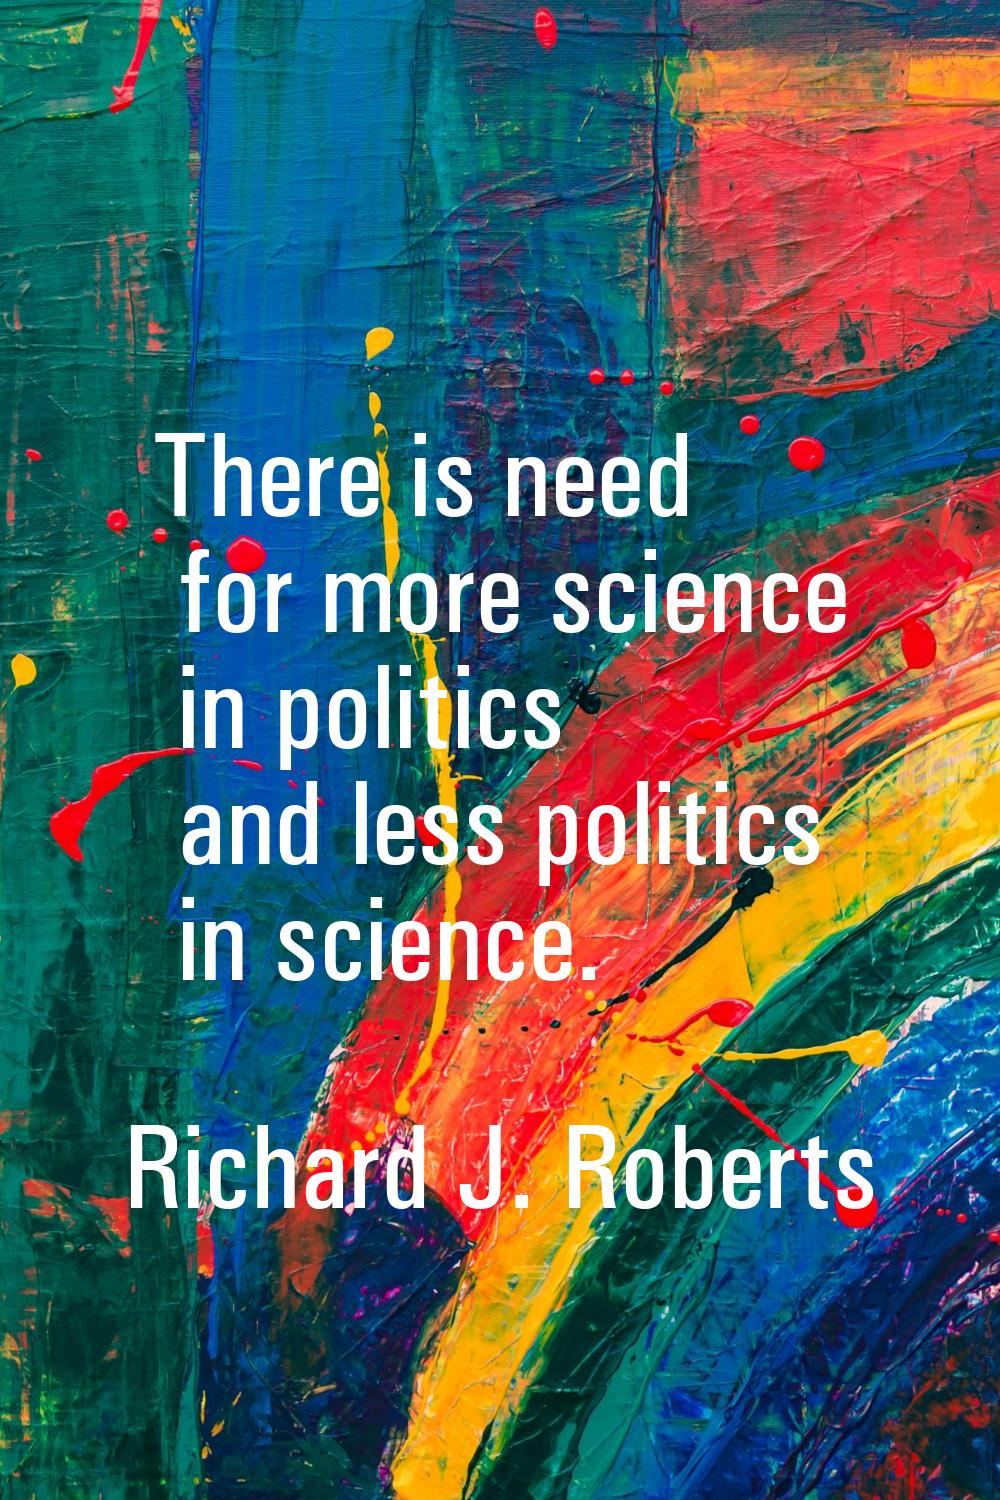 There is need for more science in politics and less politics in science.